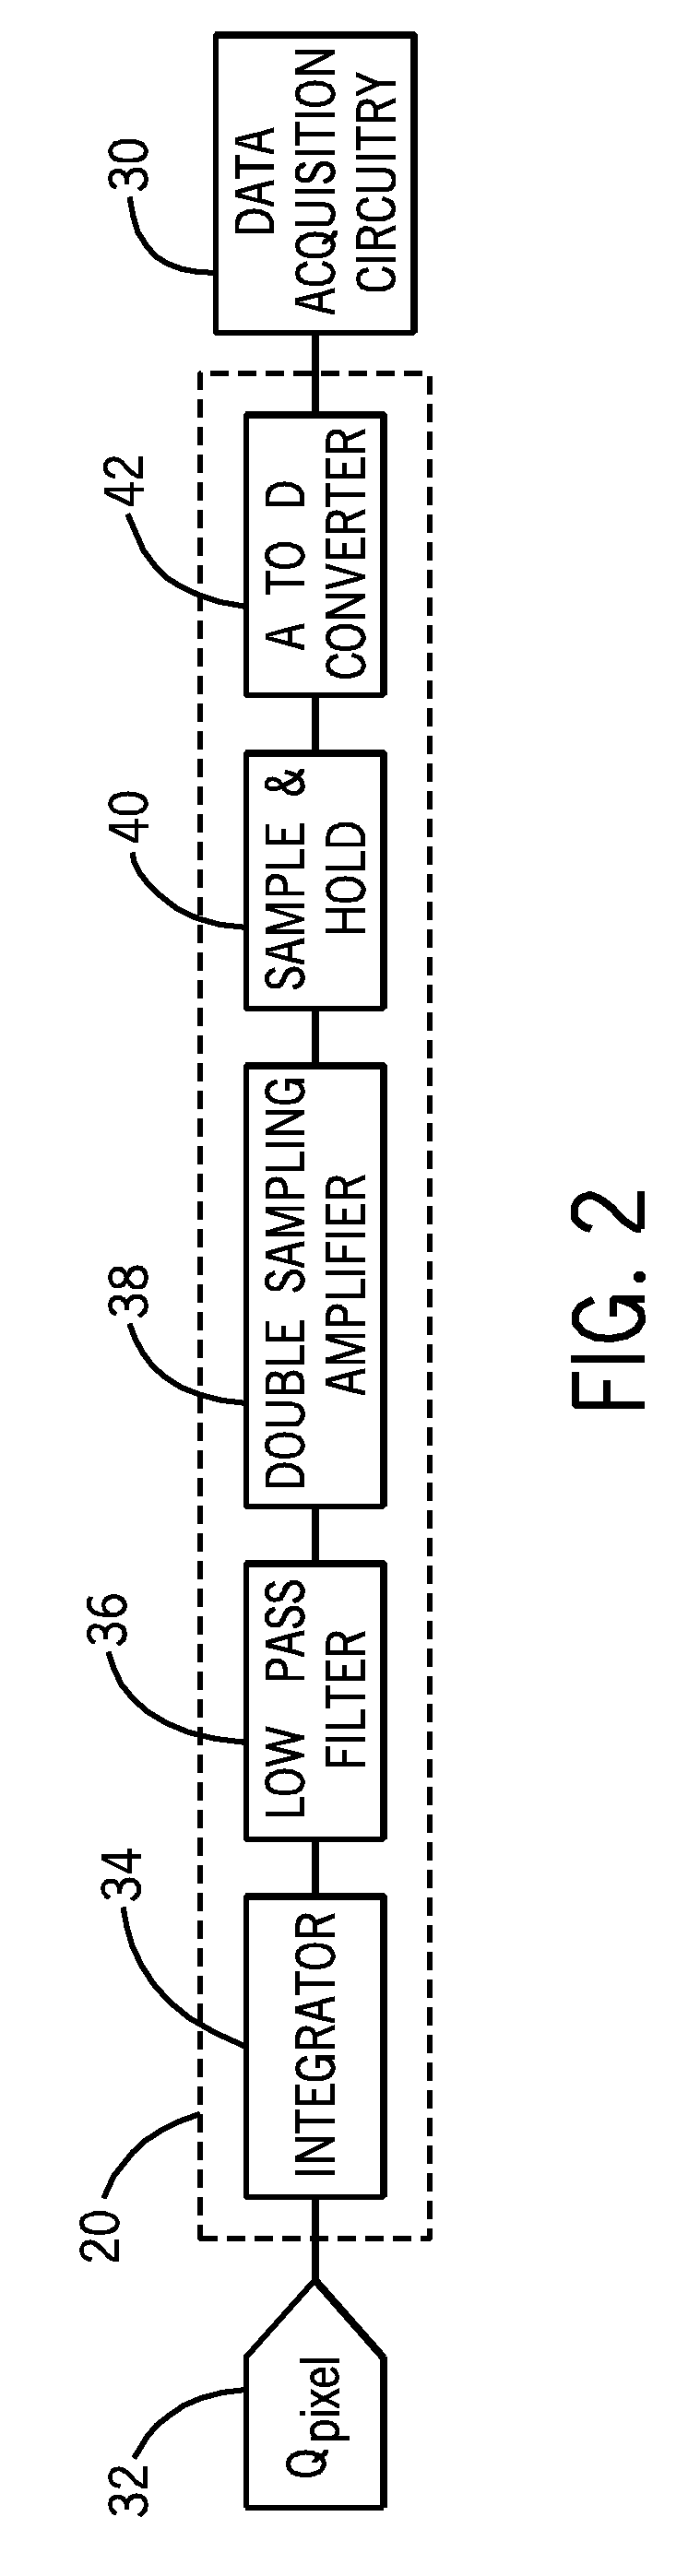 Low-noise data acquisition system for medical imaging